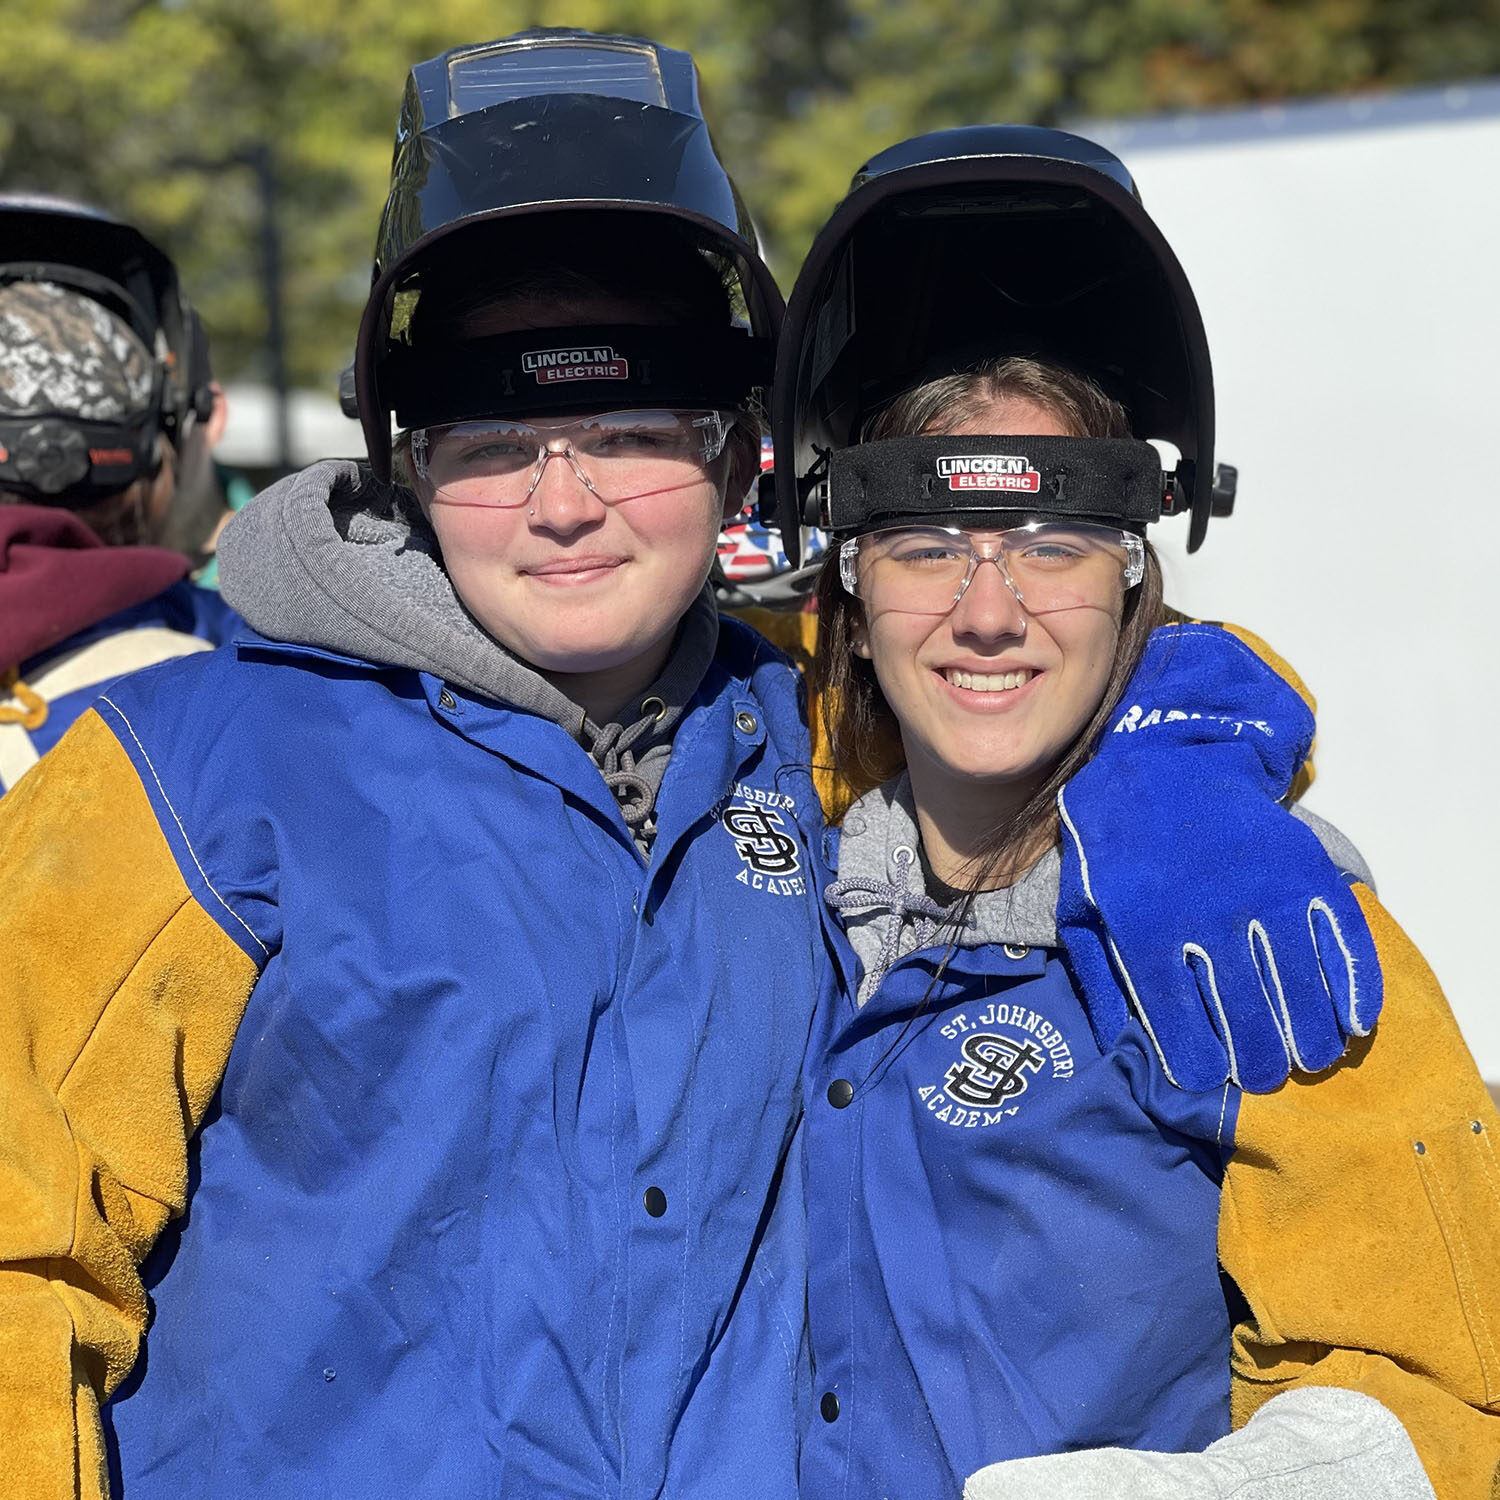 Two students smile while wearing welding jackets, gloves, and helmets.